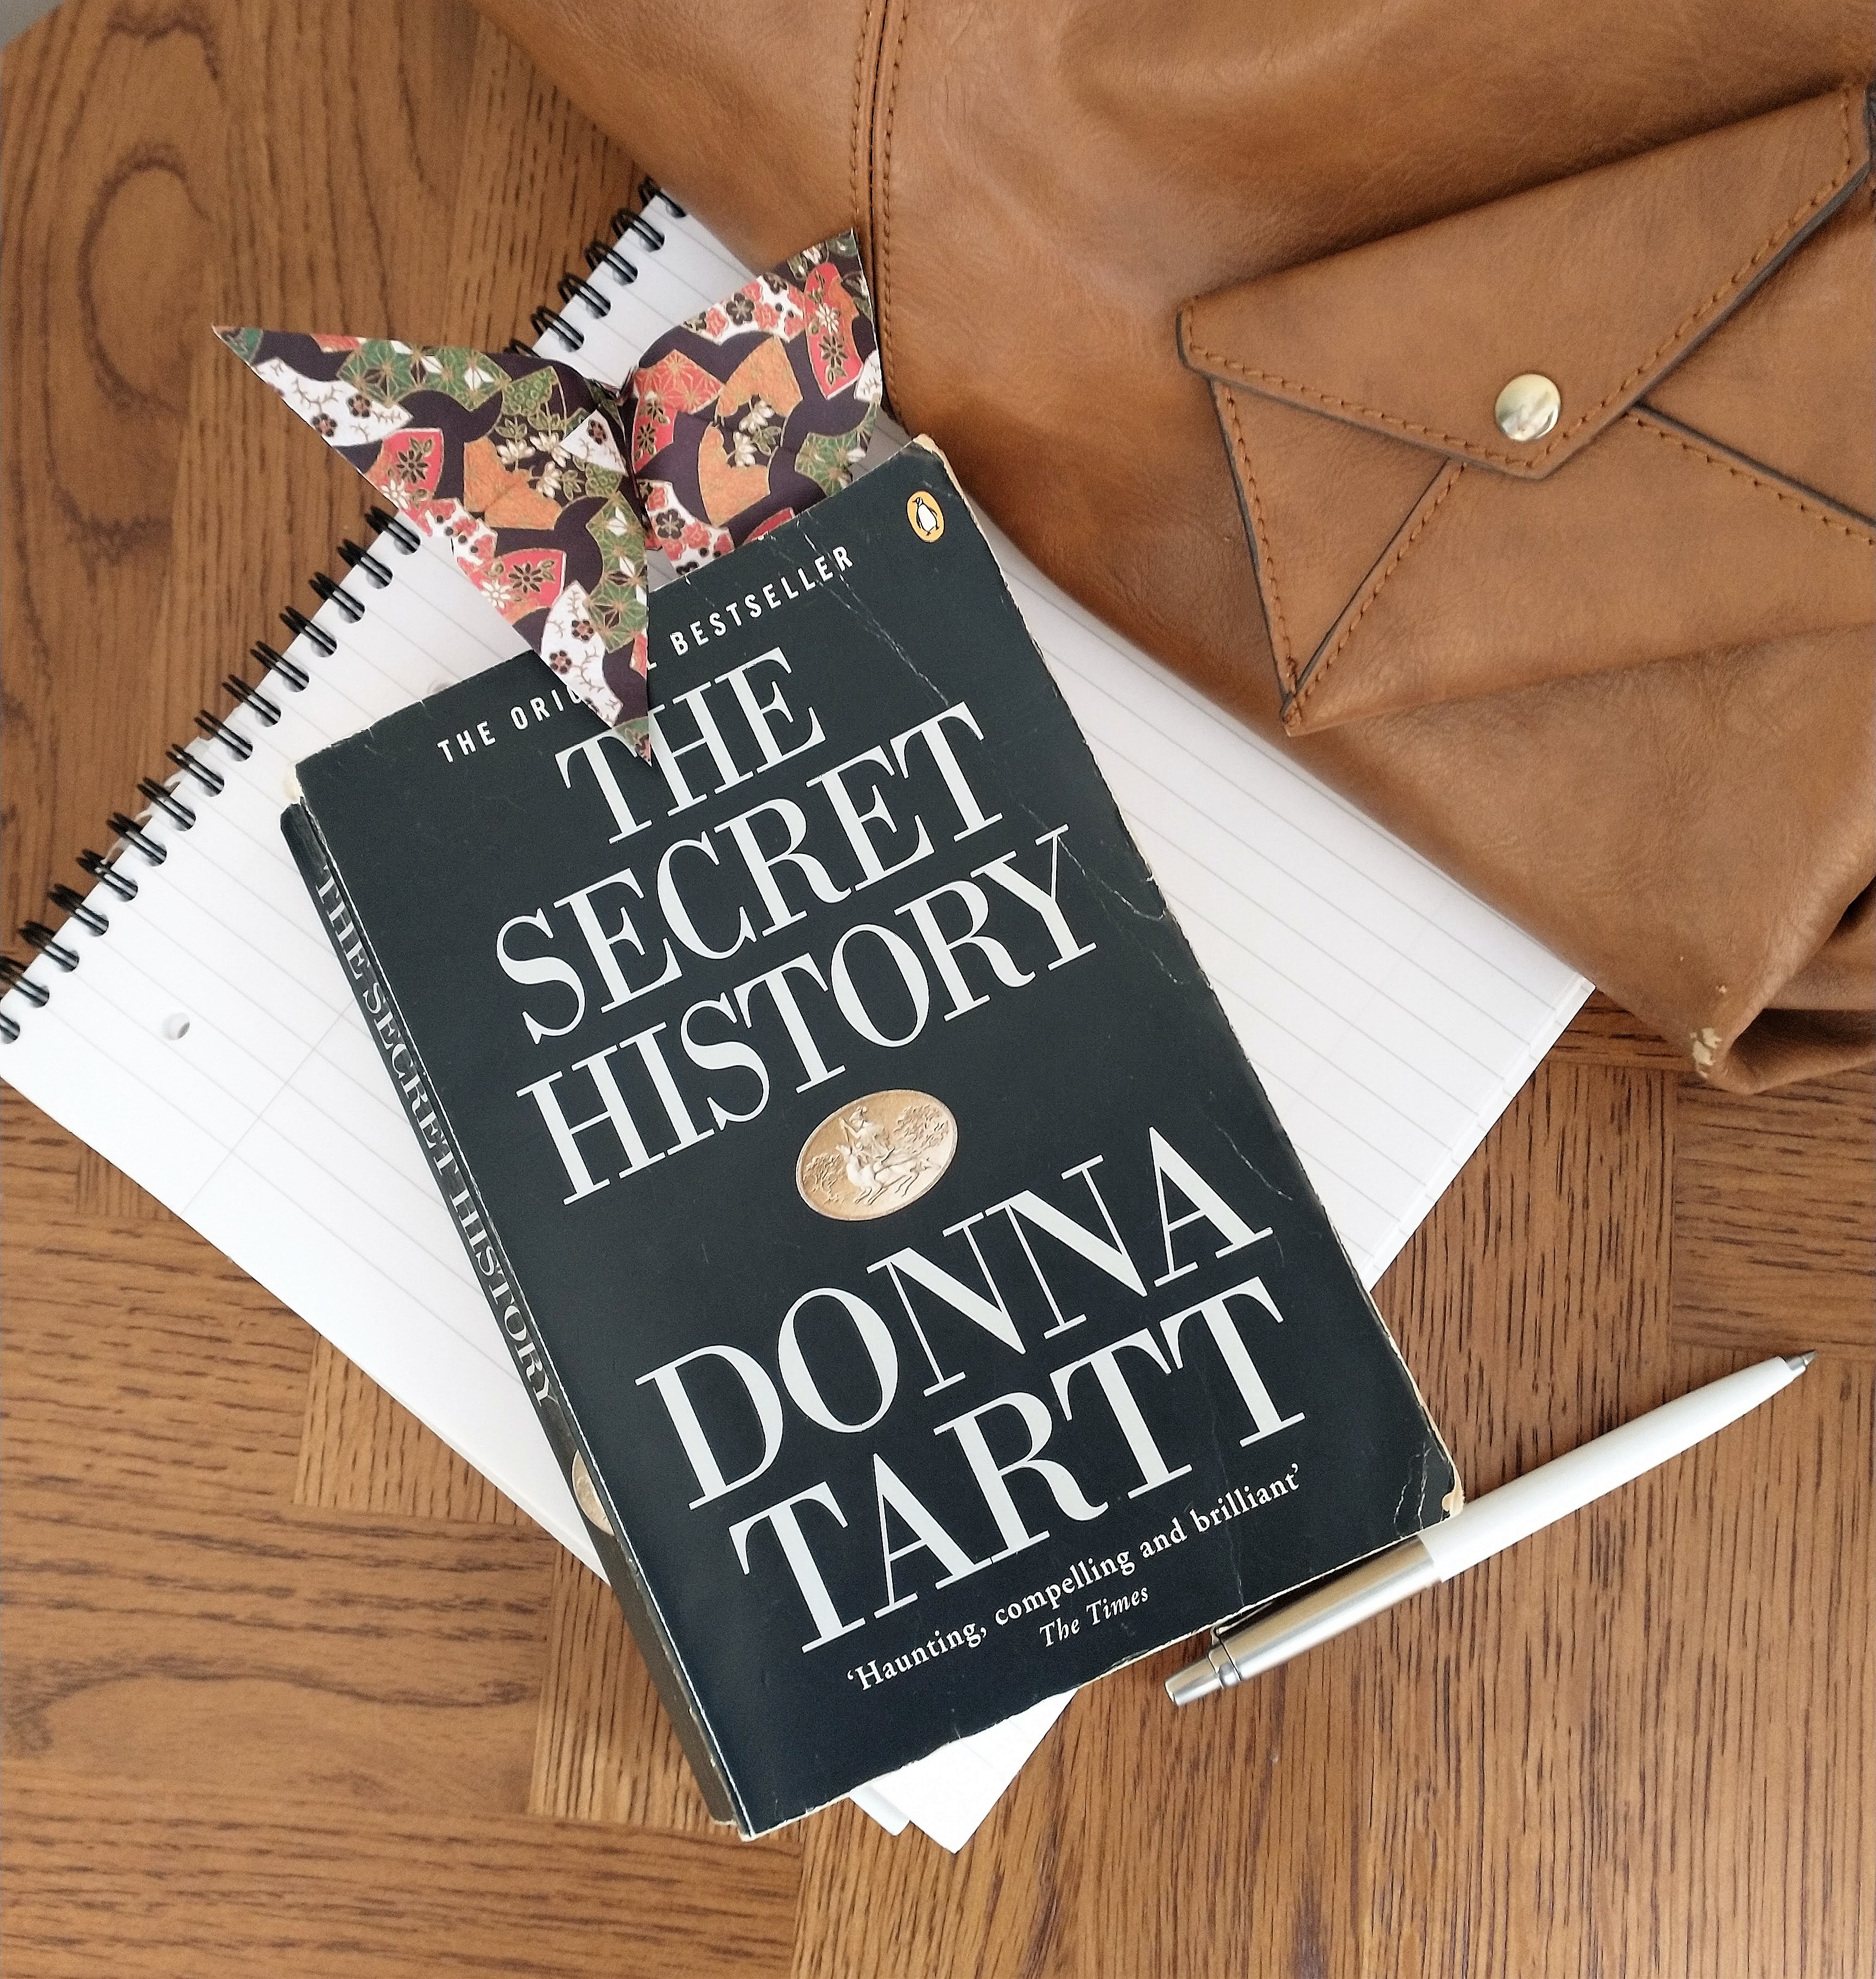 The Secret History by Donna Tartt : Review